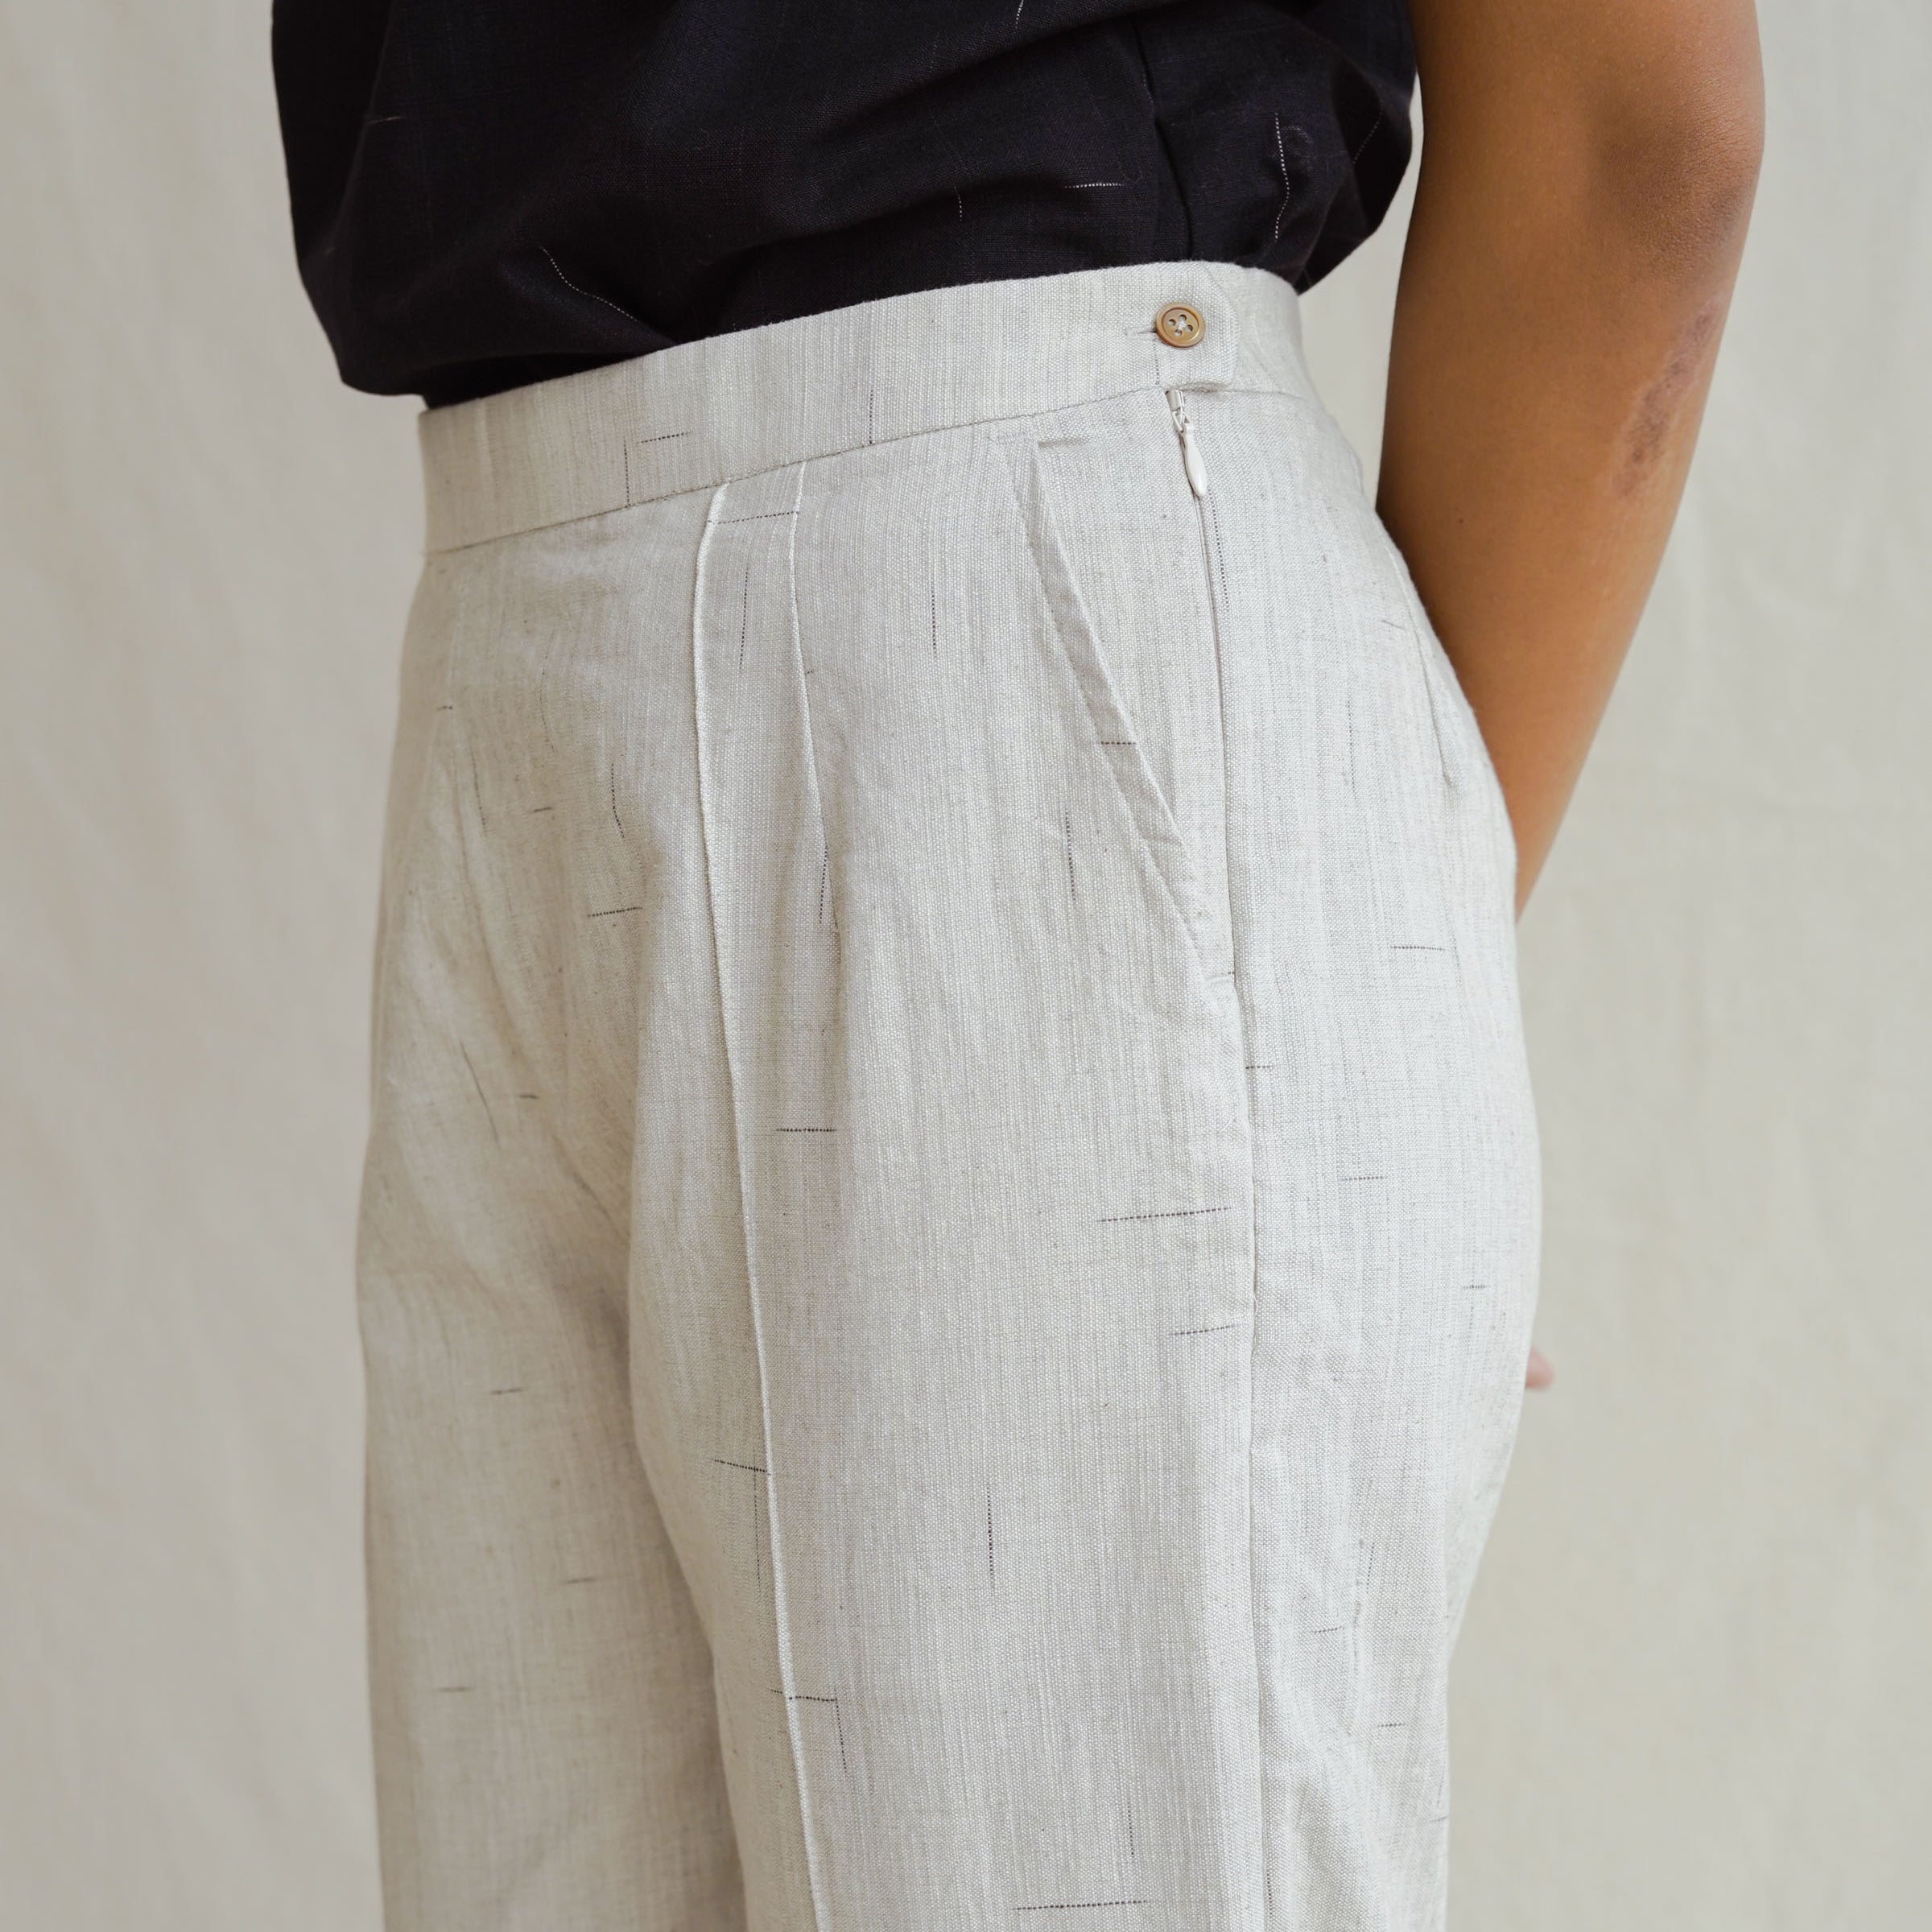 PAGISENJA - Fitted Pants